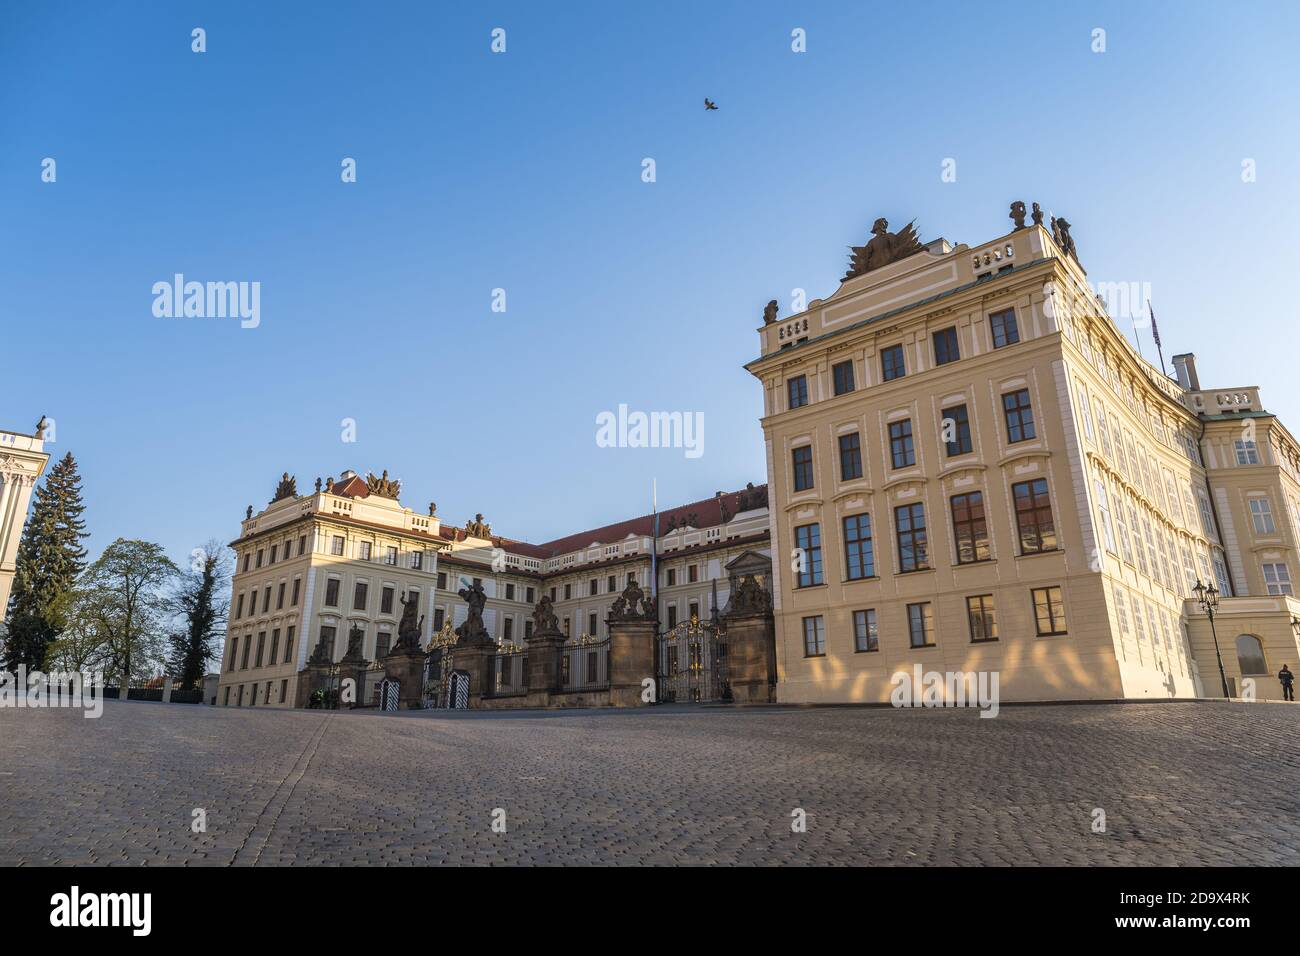 Prague castle Located in the Hradcany district is the official residence and office of the President of the Czech Republic, Hradcanske square Stock Photo